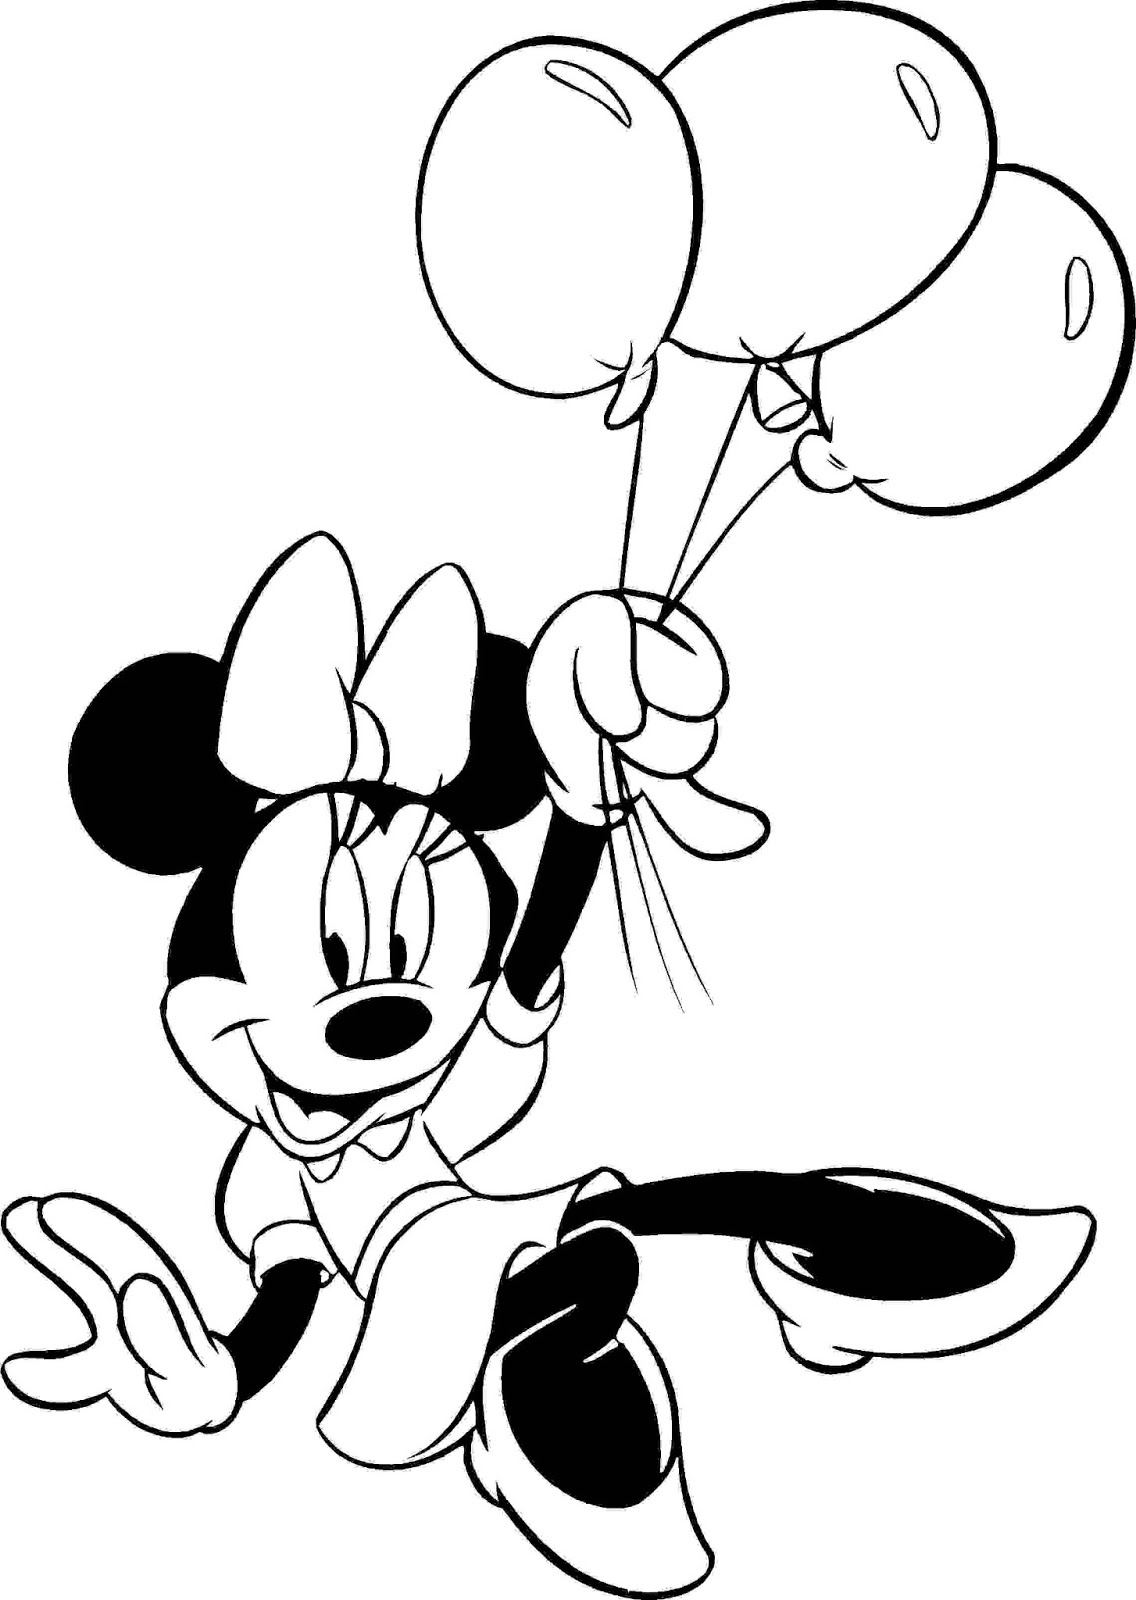 Minnie Mouse Coloring Pages | Free Download Best Minnie Mouse - Free Printable Minnie Mouse Coloring Pages